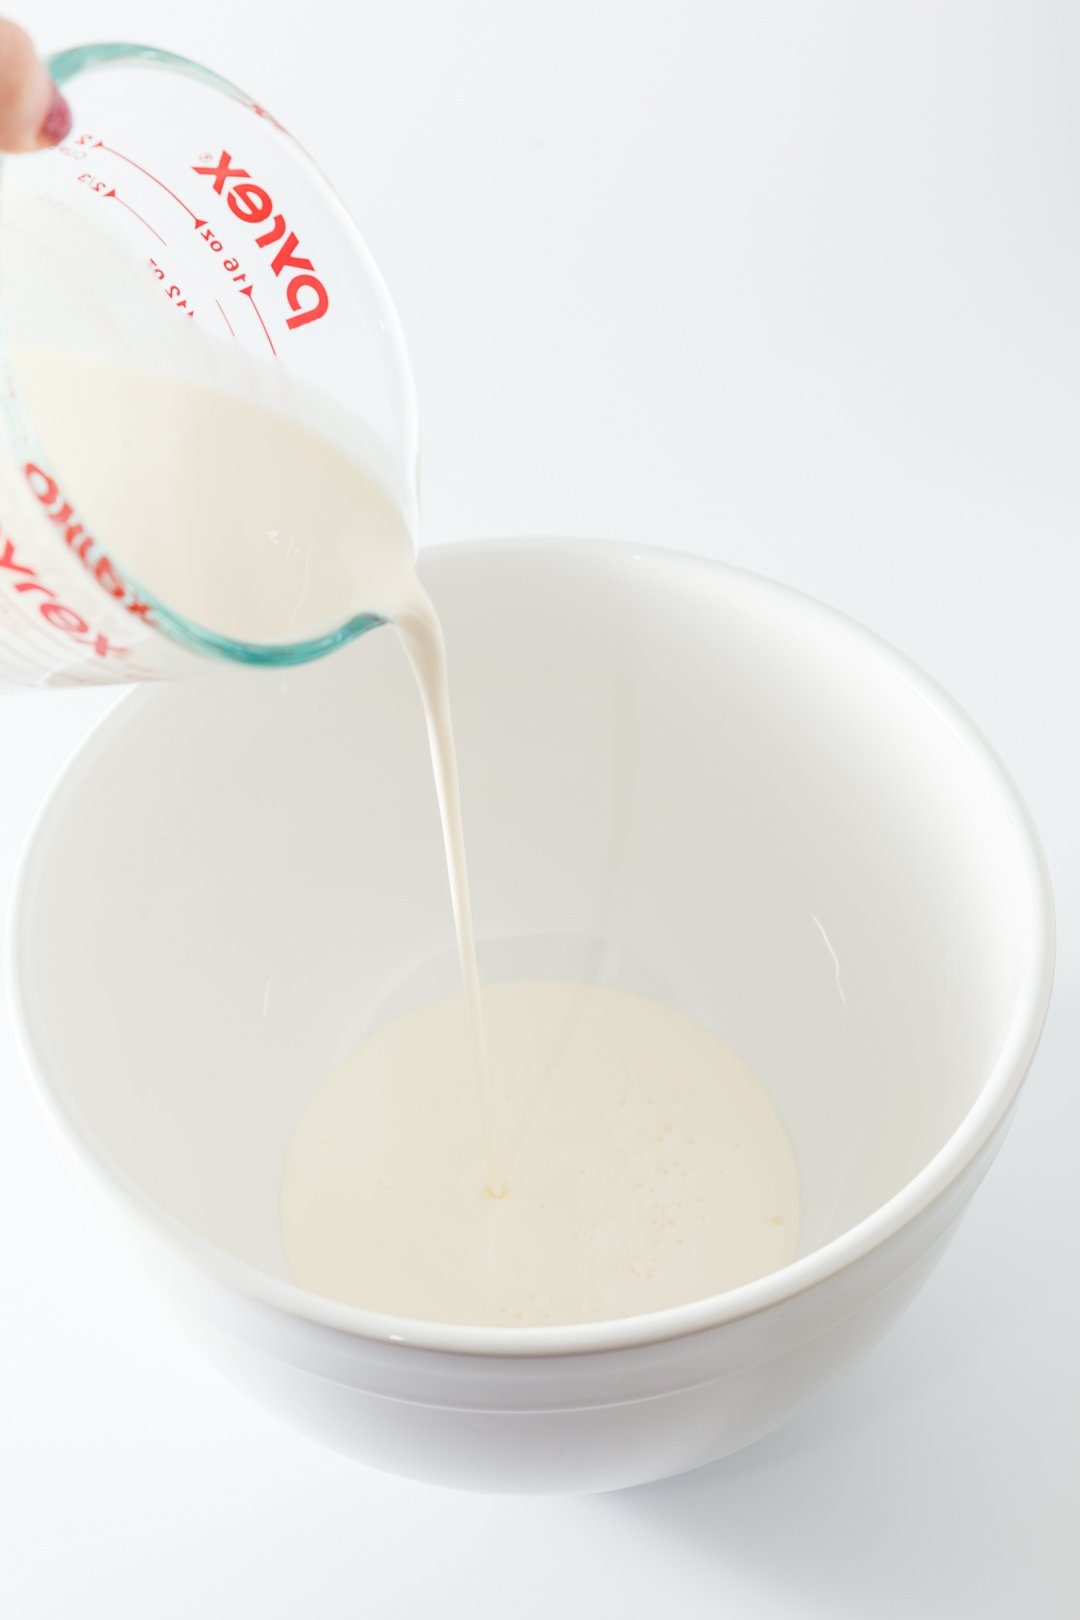 pouring heavy whipping cream into a mixing bowl